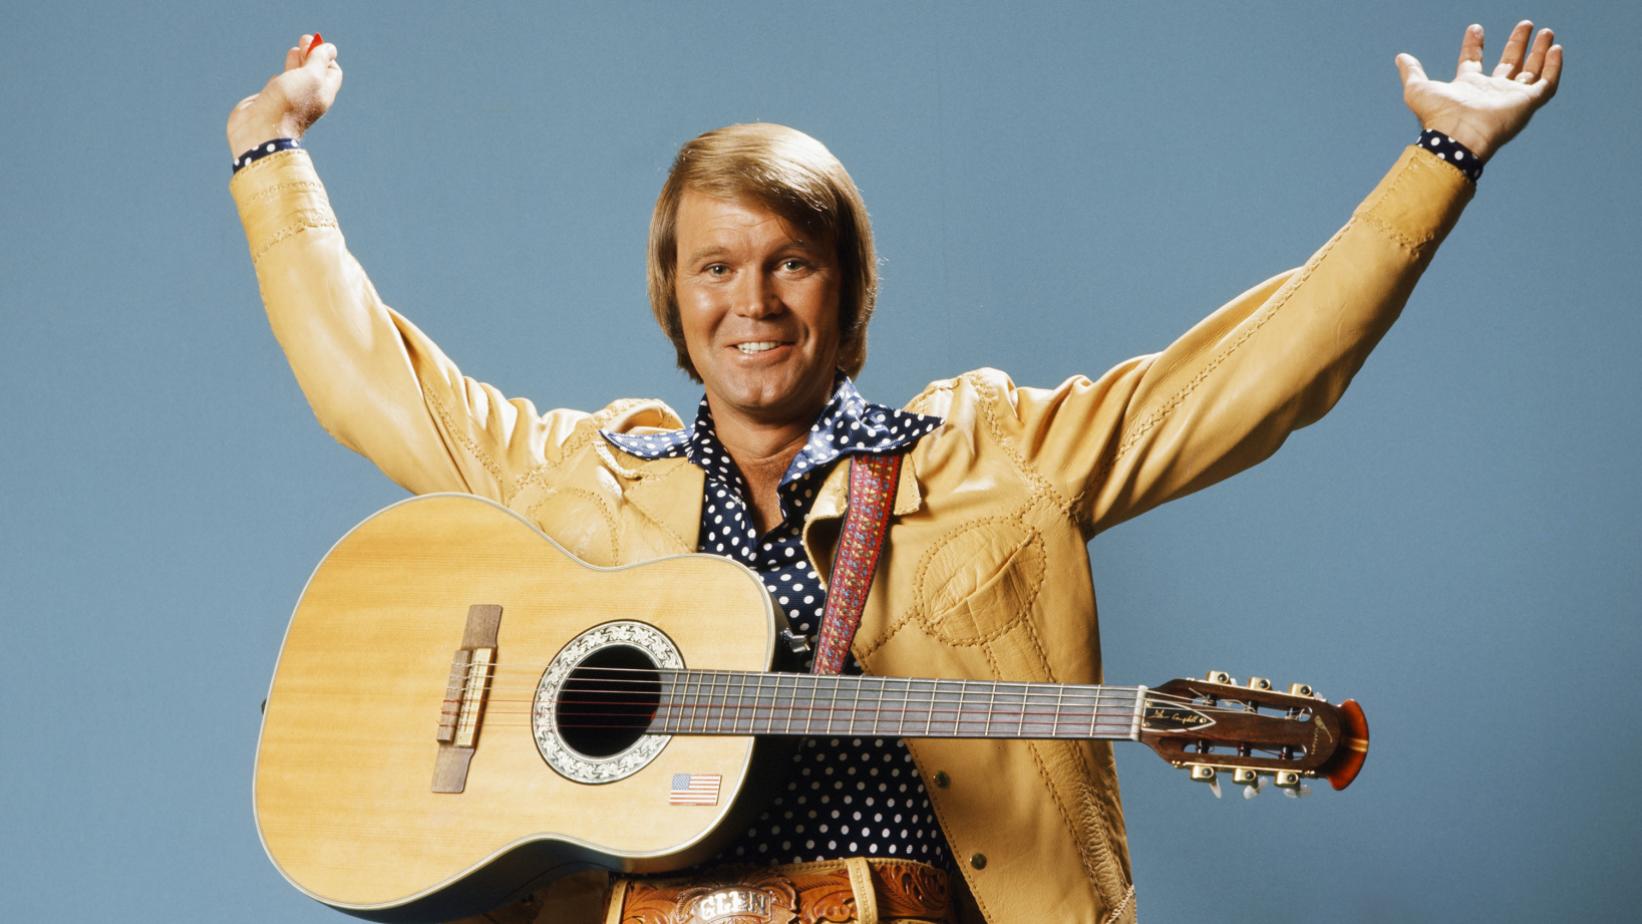 Happy Birthday Glen Campbell (b 1936) Great singer songwriter who was a Beach Boy for a brief moment 